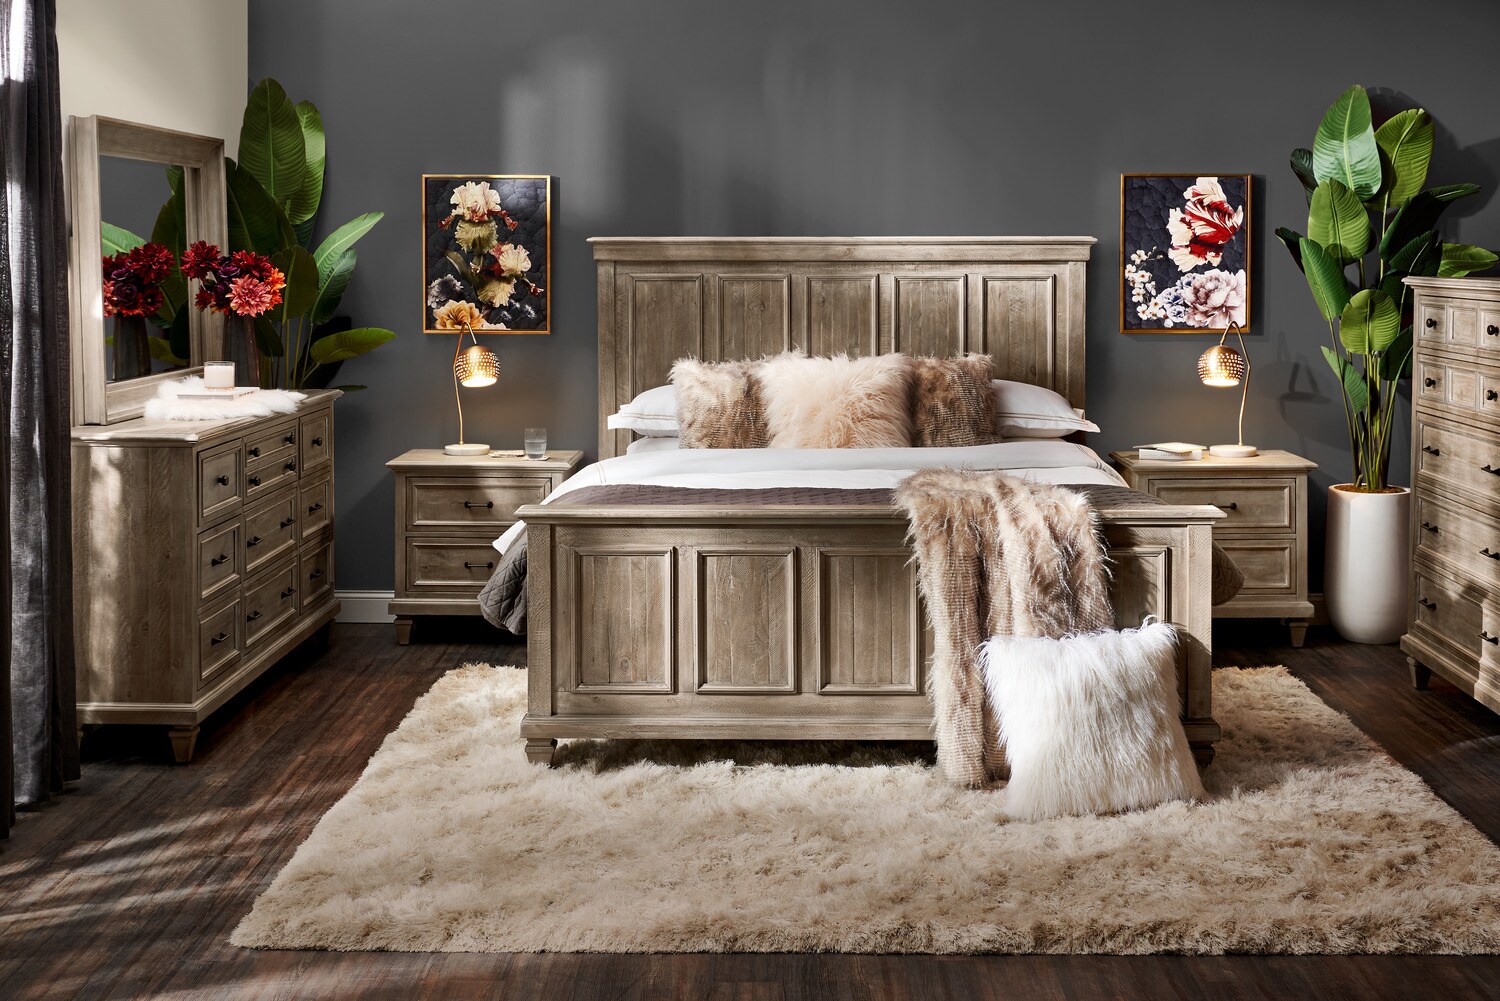 suppliers harrison brothers bedroom furniture